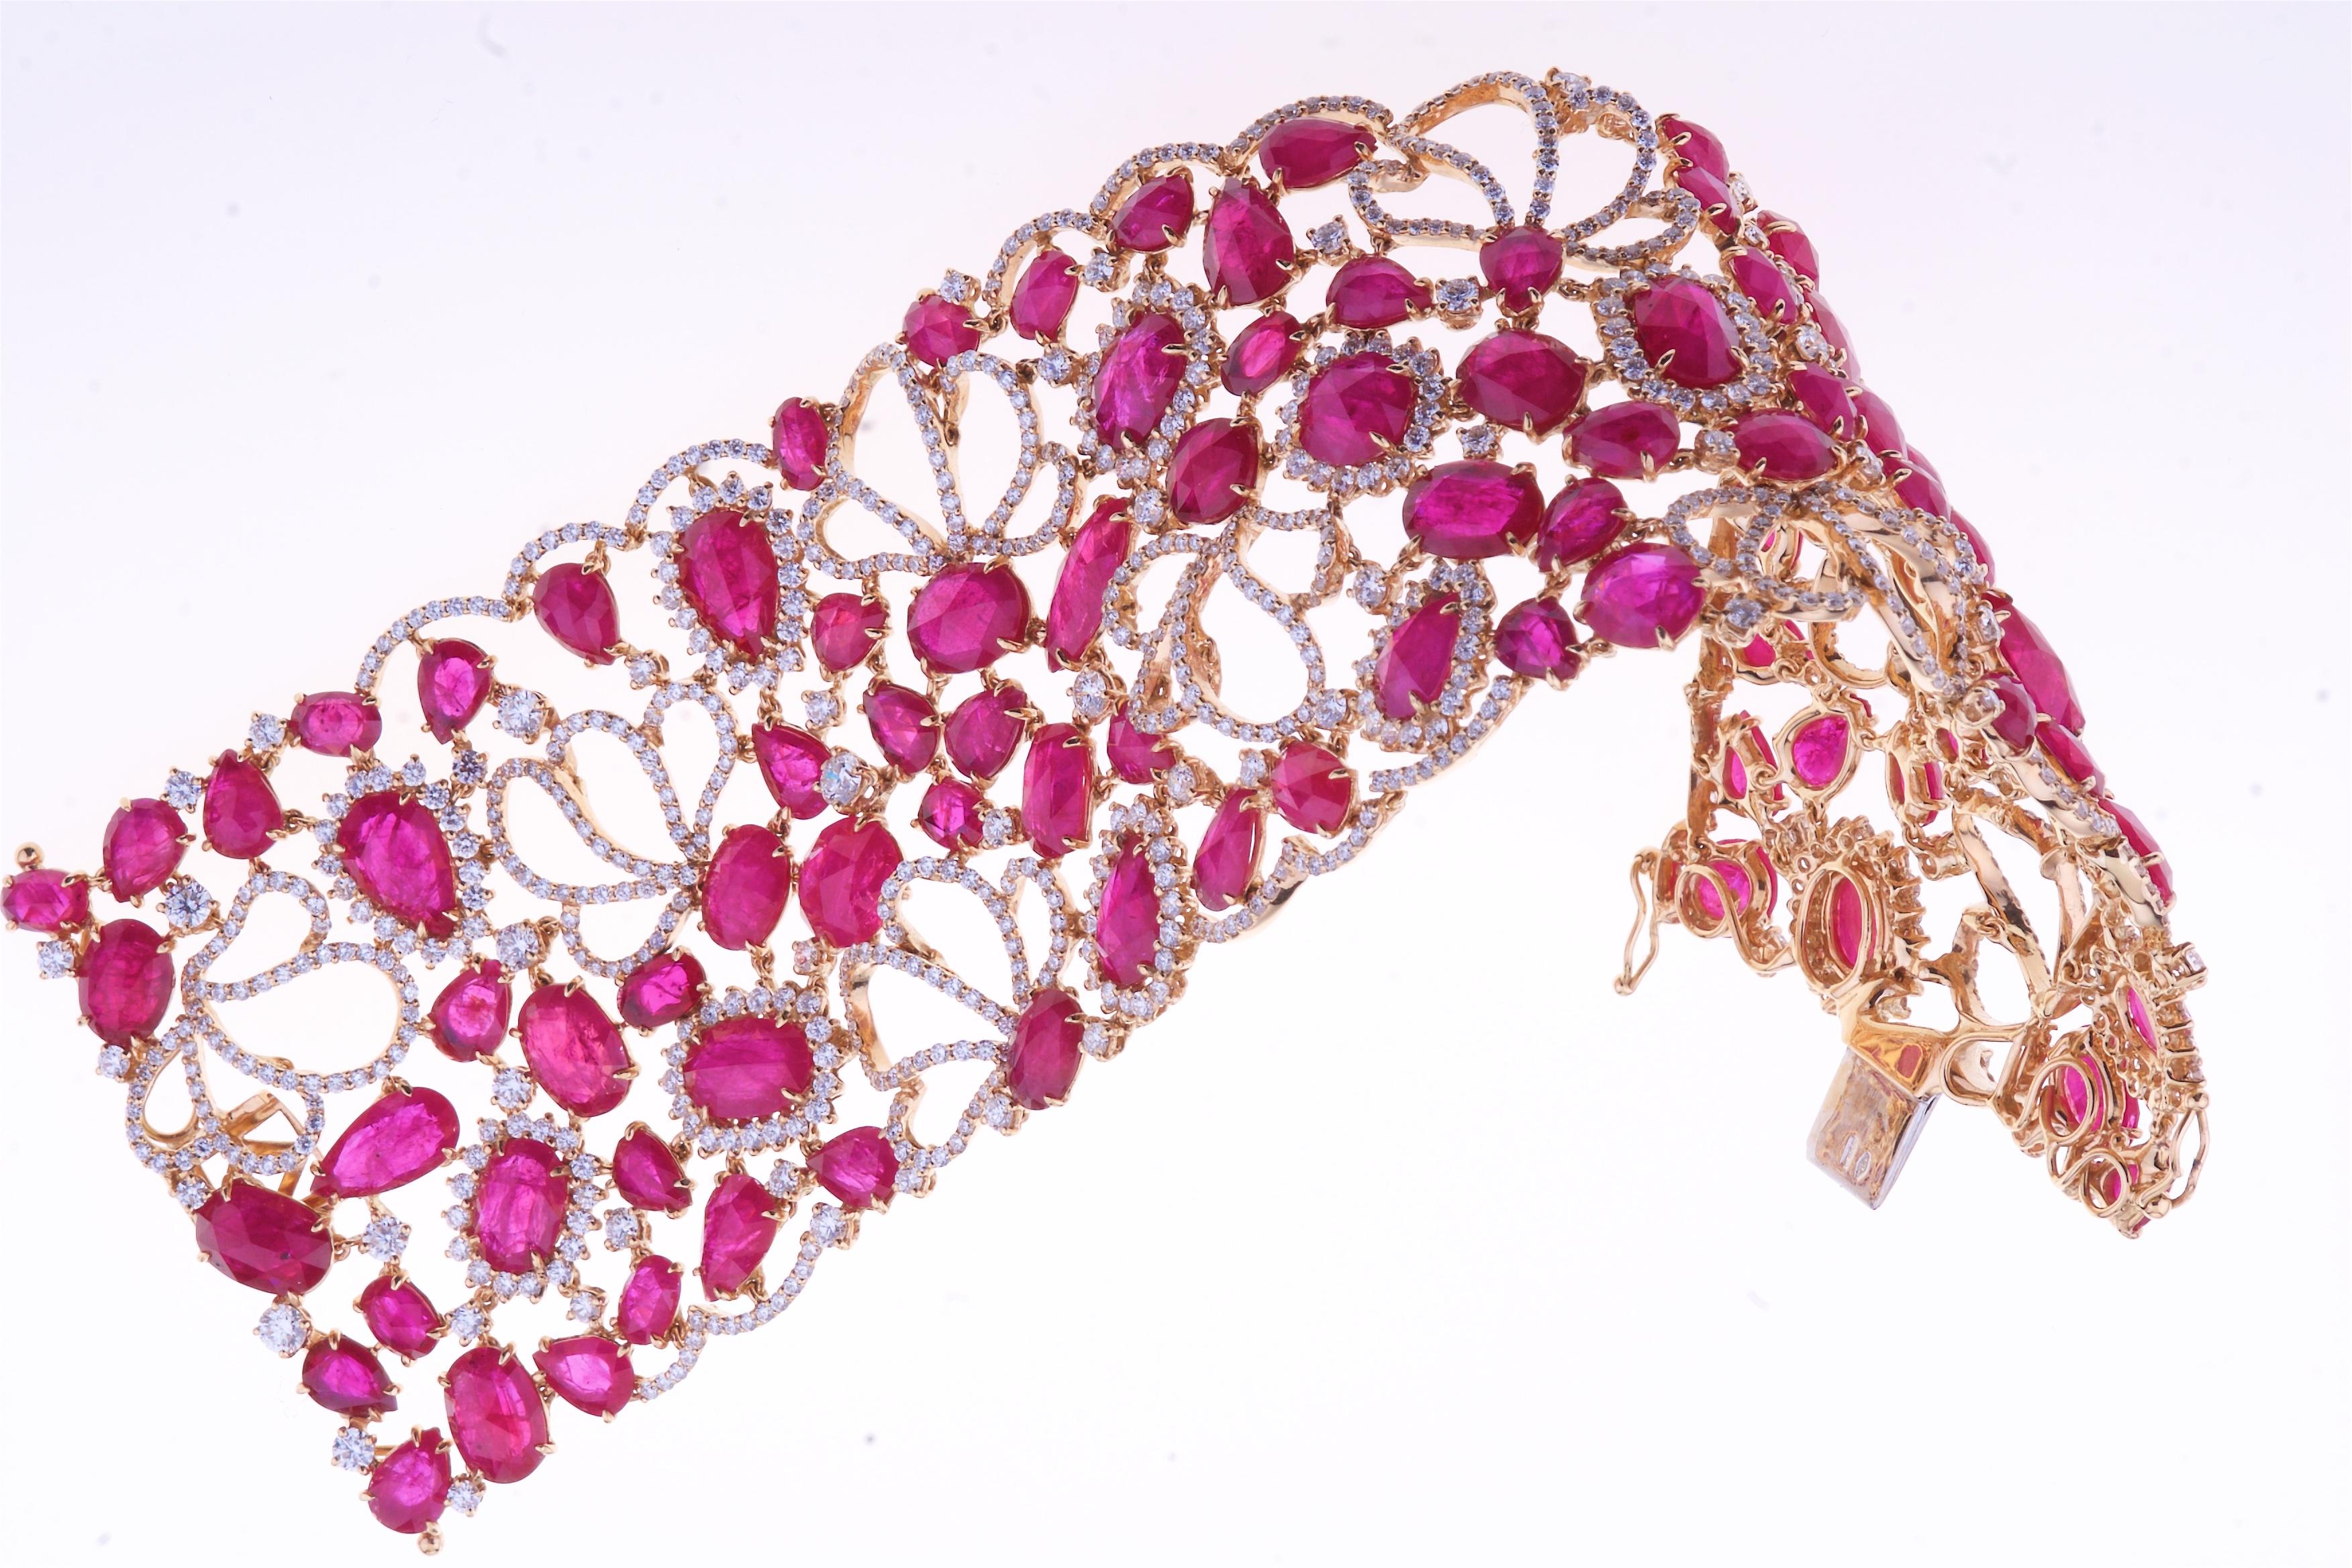 Contemporary Stunning Band Bracelet with Ruby and Diamonds in a Flowers Design For Sale